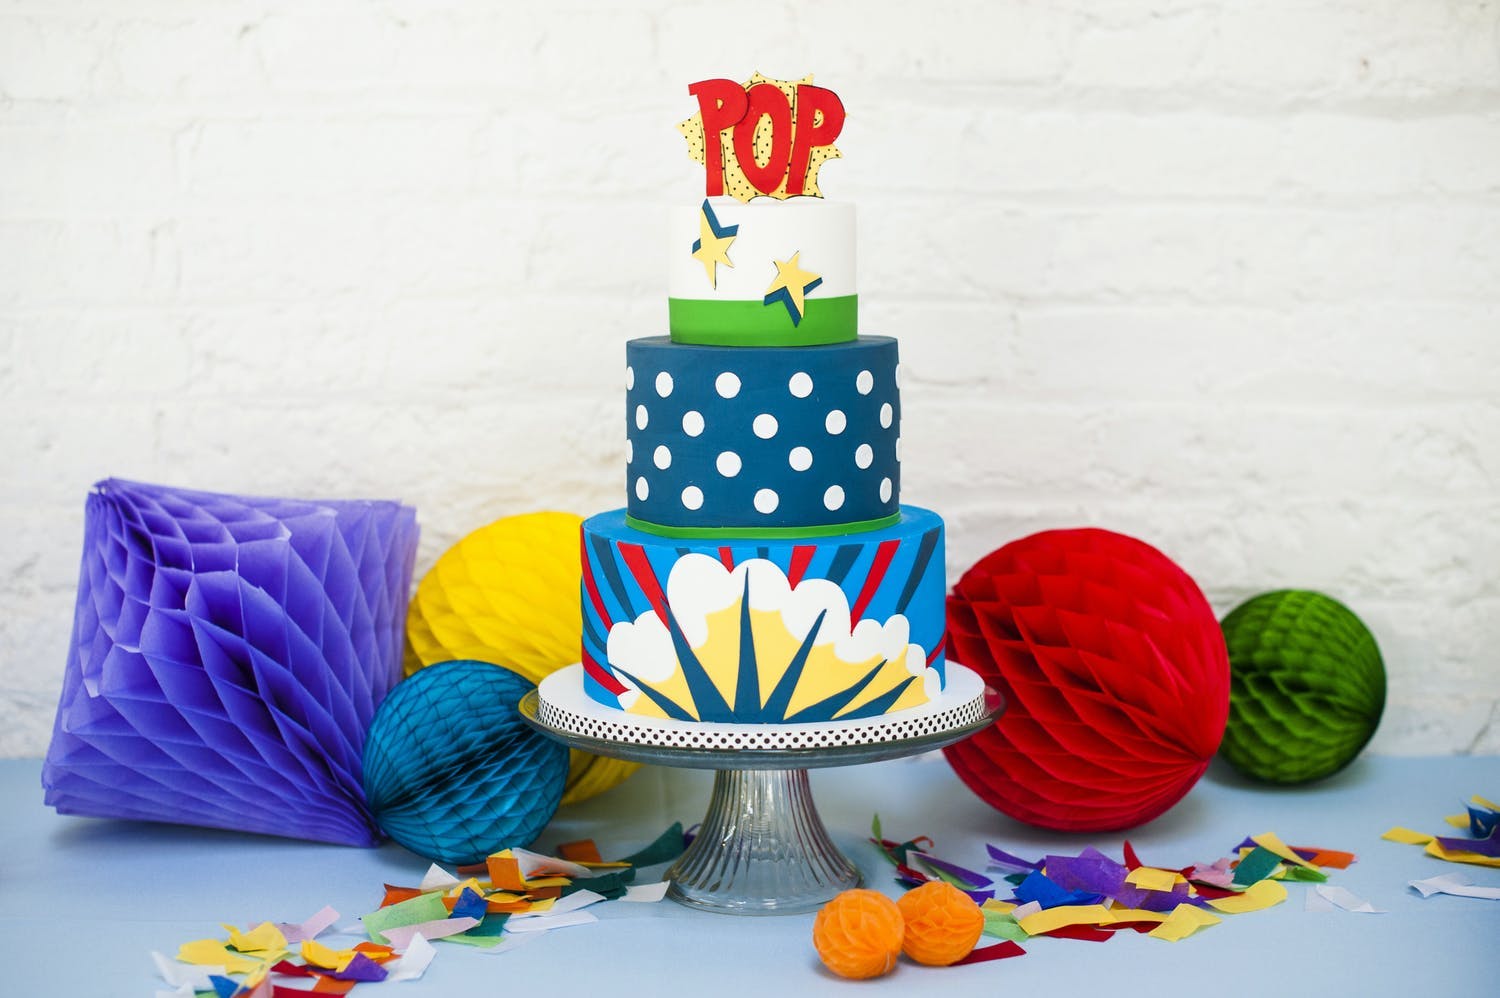 Pop Art-Themed Cake and Décor at Baby Shower | PartySlate